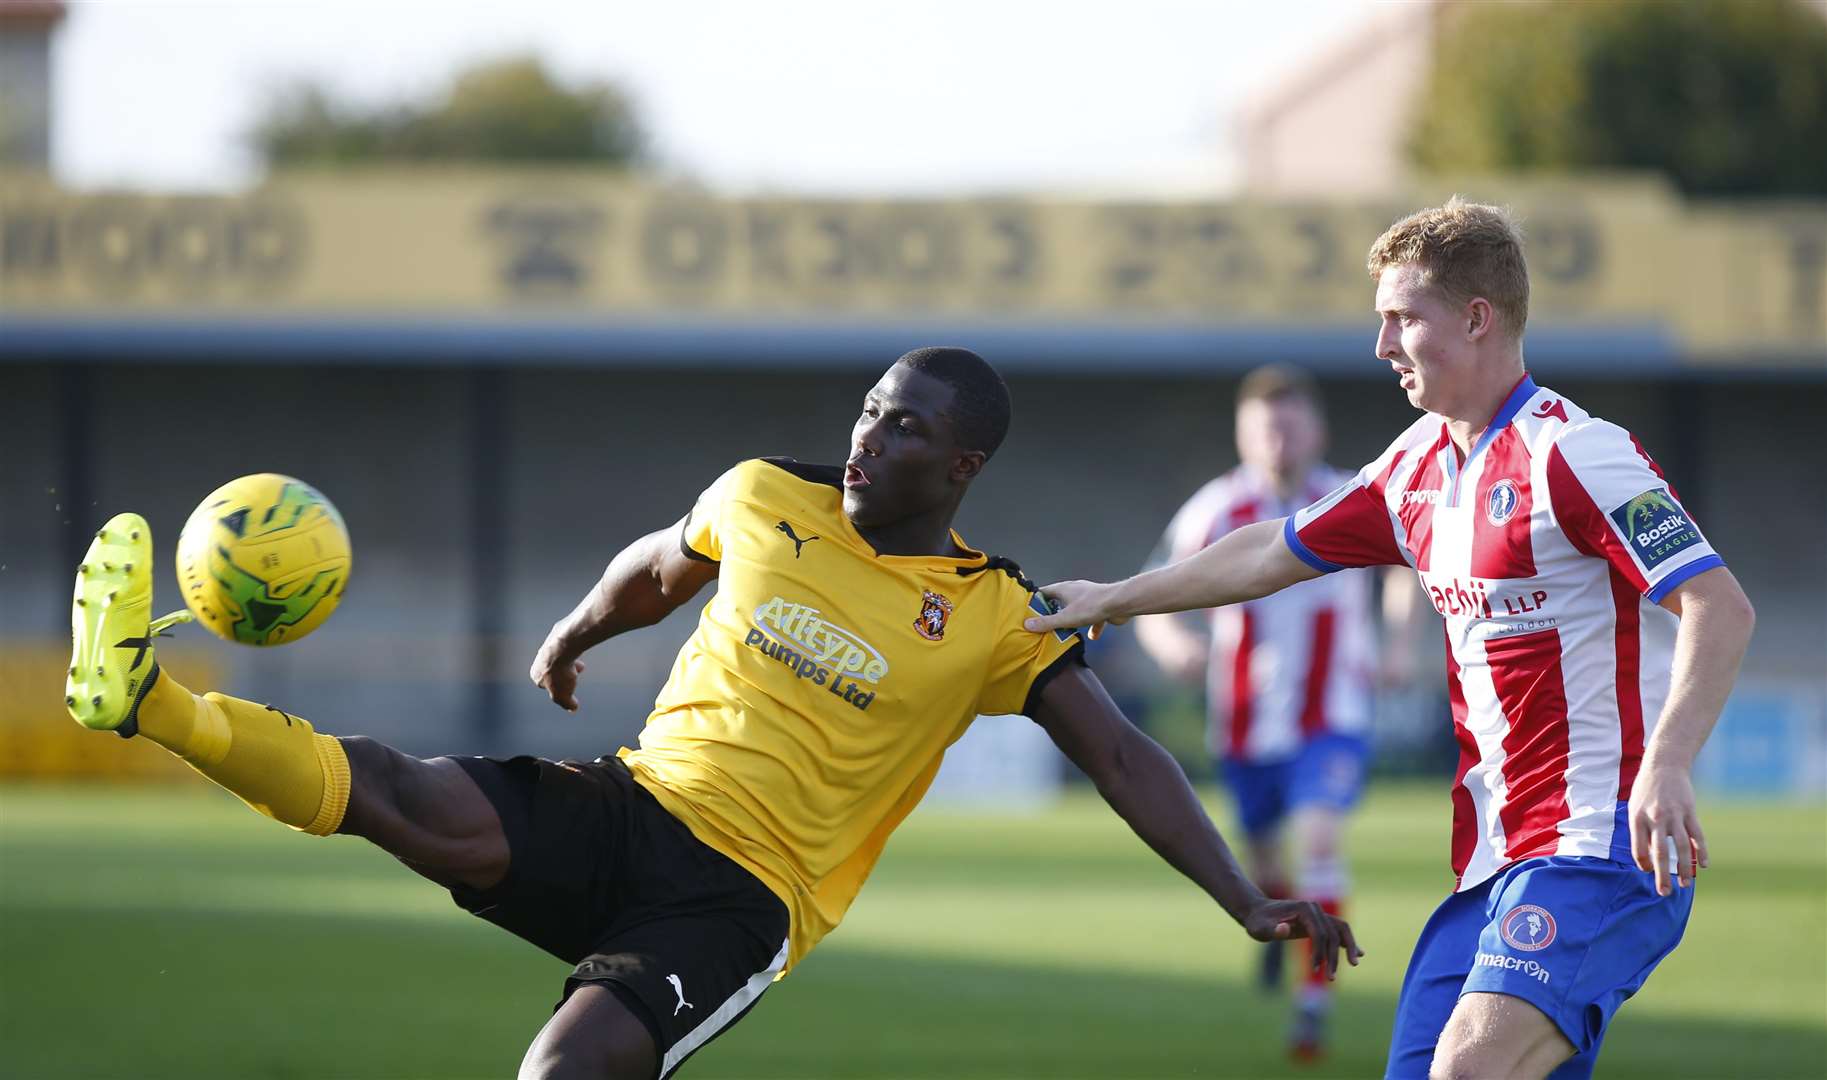 Folkestone's Ade Yusuff stretches for the ball against Dorking Wanderers Picture: Andy Jones